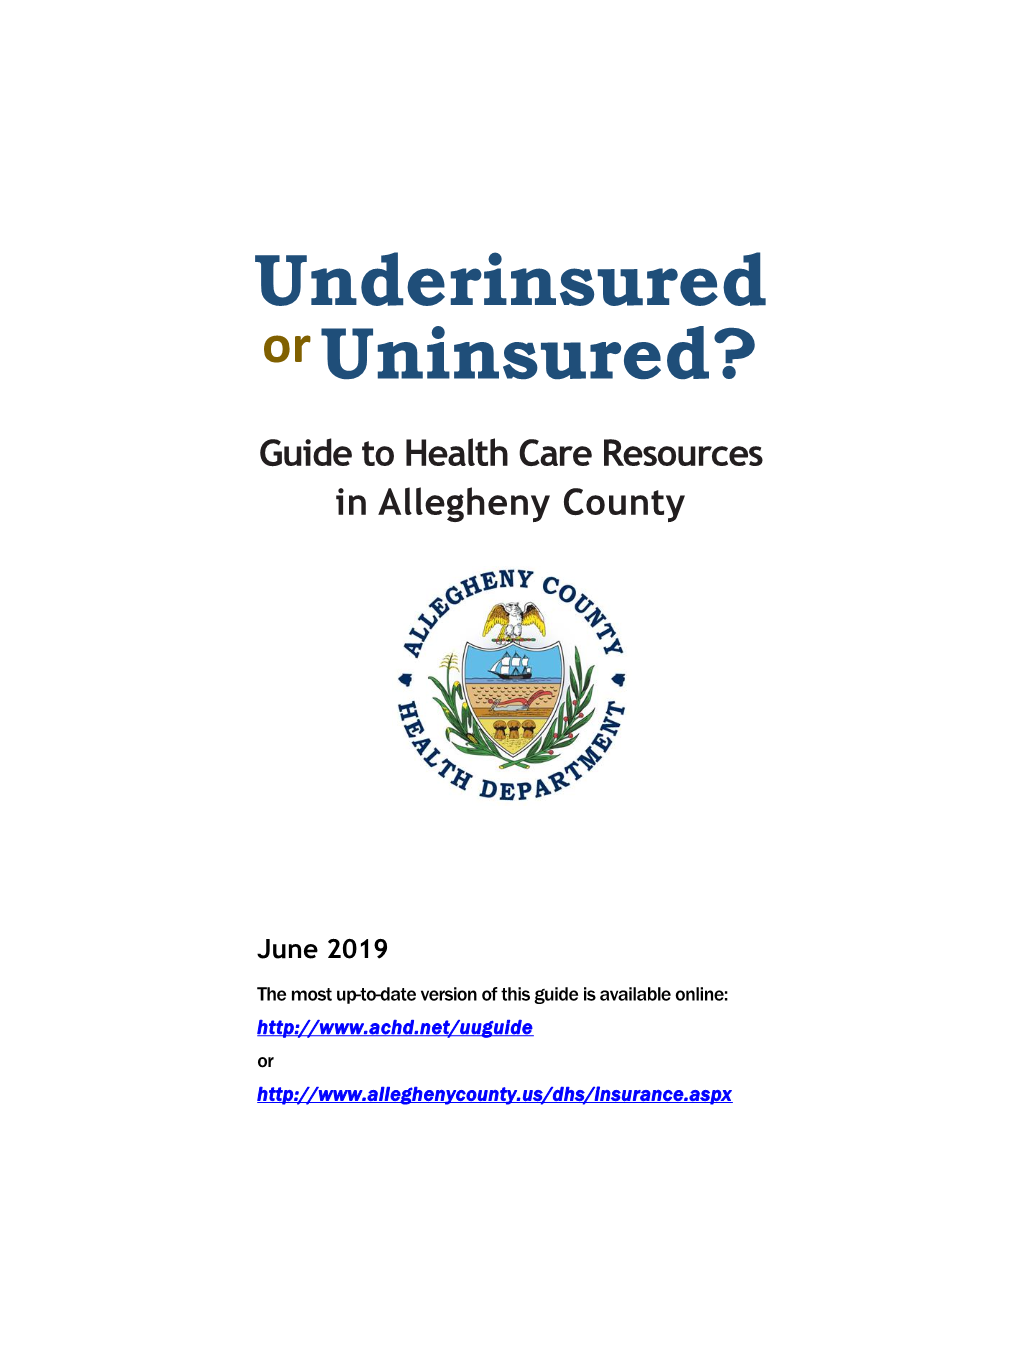 Guide to Health Care Resources in Allegheny County